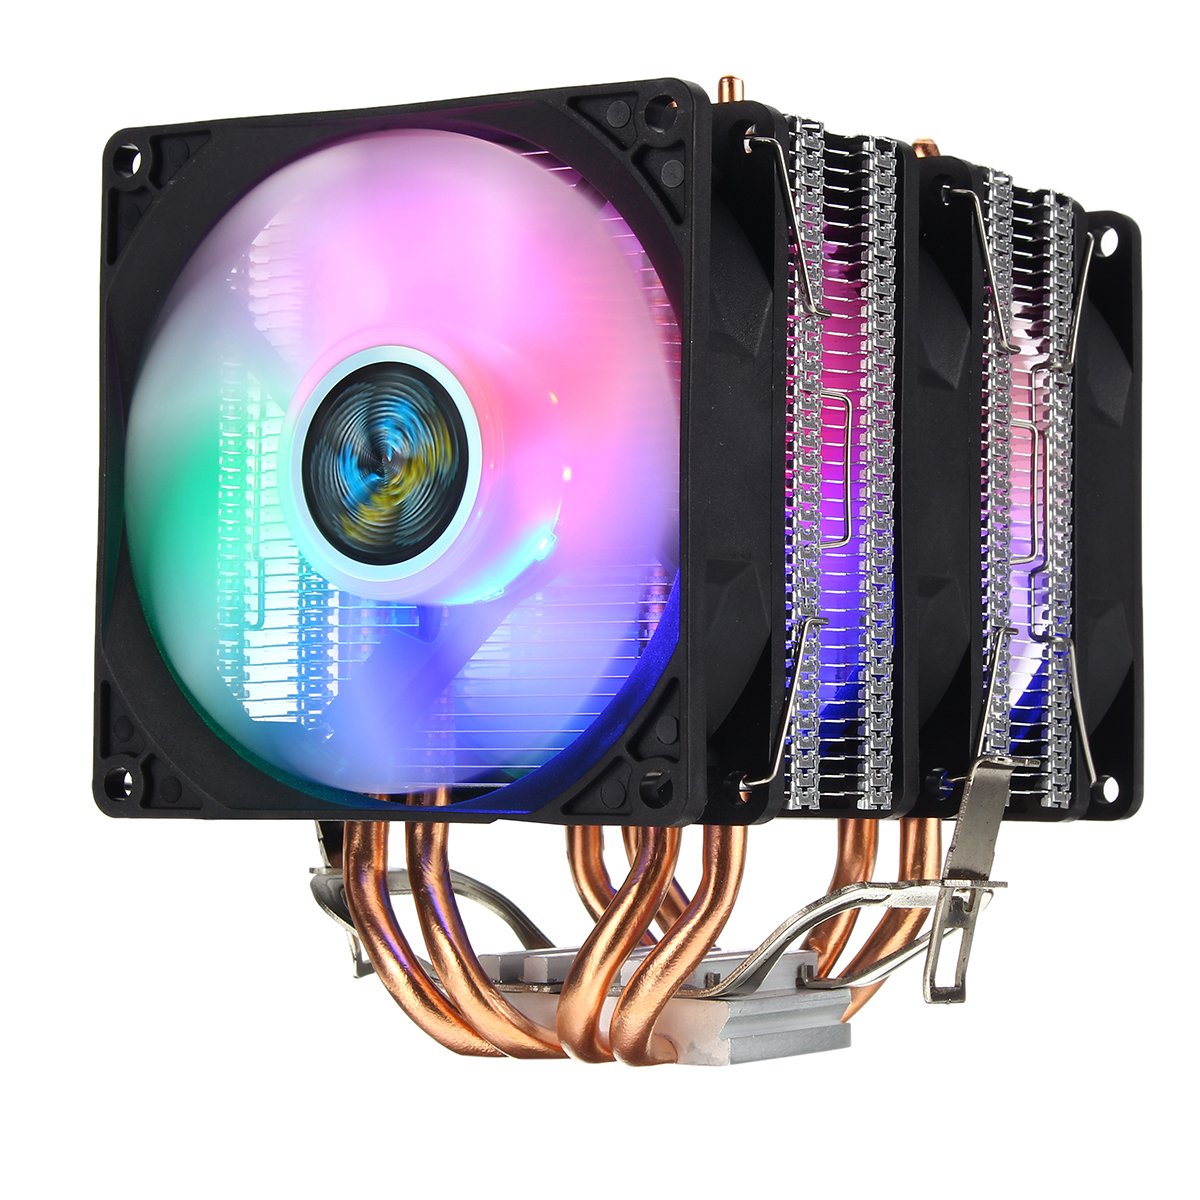 3 Pin Triple Fans Four Copper Heat Pipes Colorful LED Light CPU Cooling Fan Cooler Heatsink for Intel AMD 1